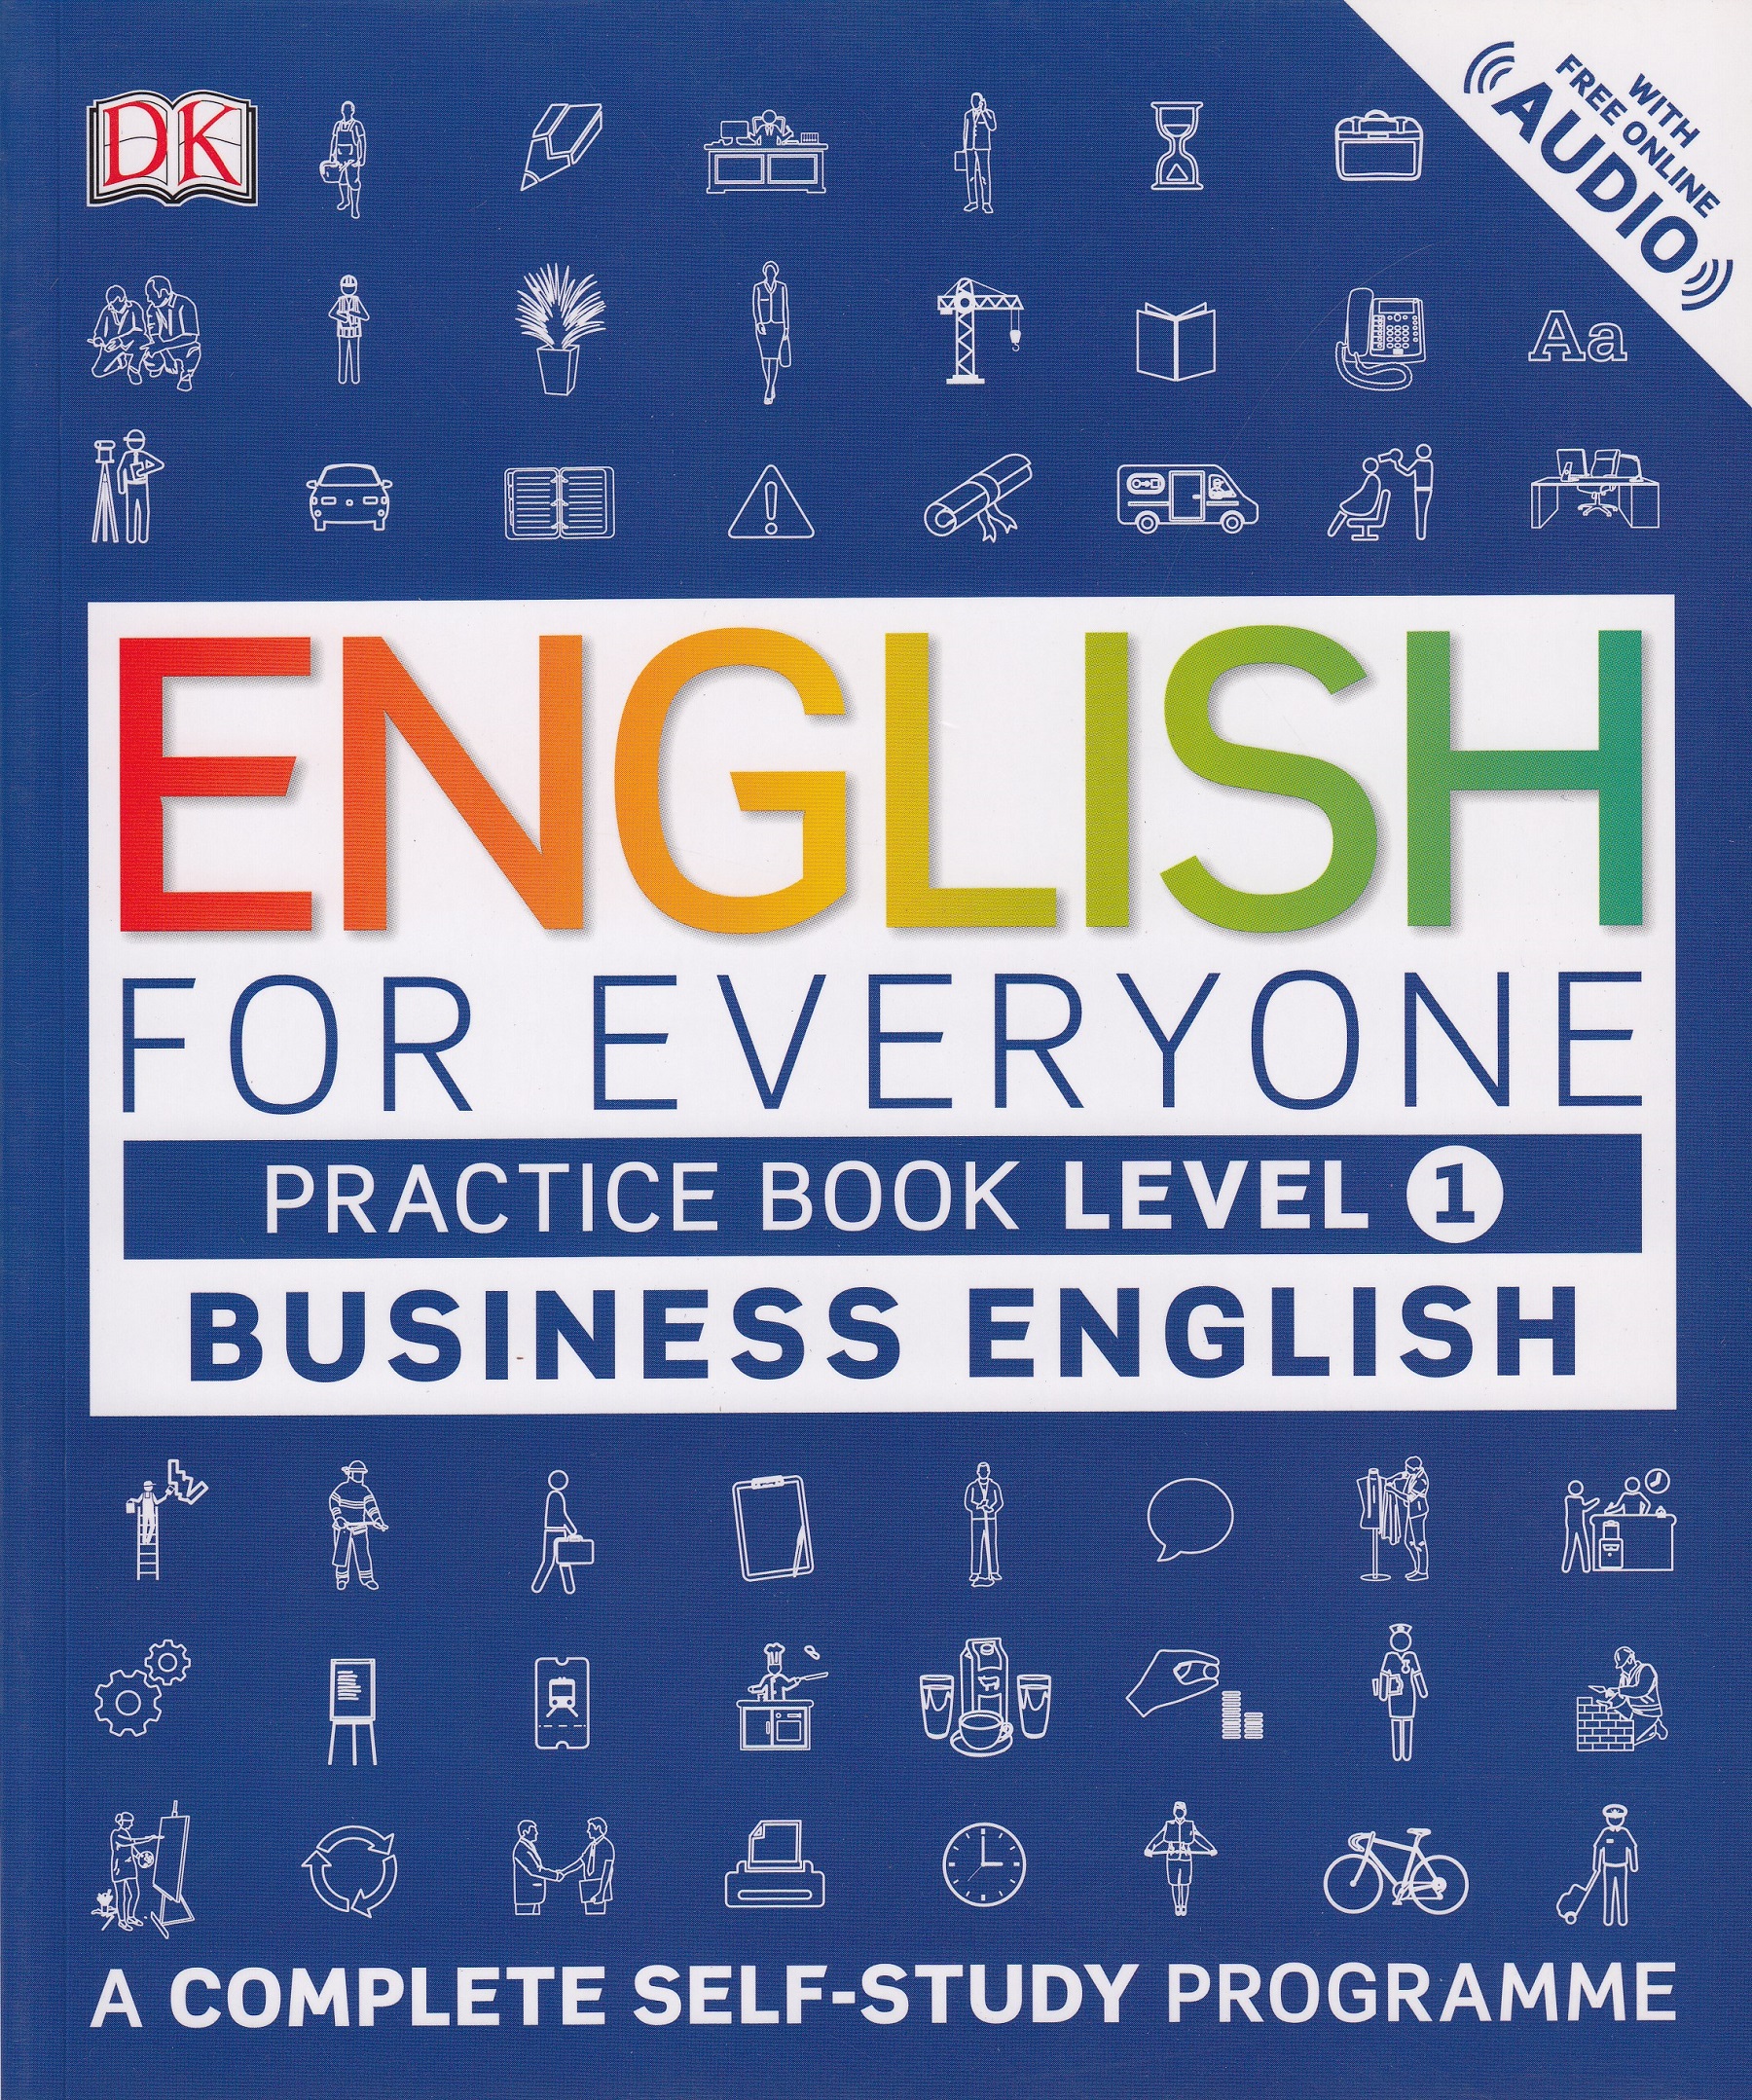 ENGLISH FOR EVERYONE BUSINESS ENG.1:PRACTICE BOOK by DK TODAY